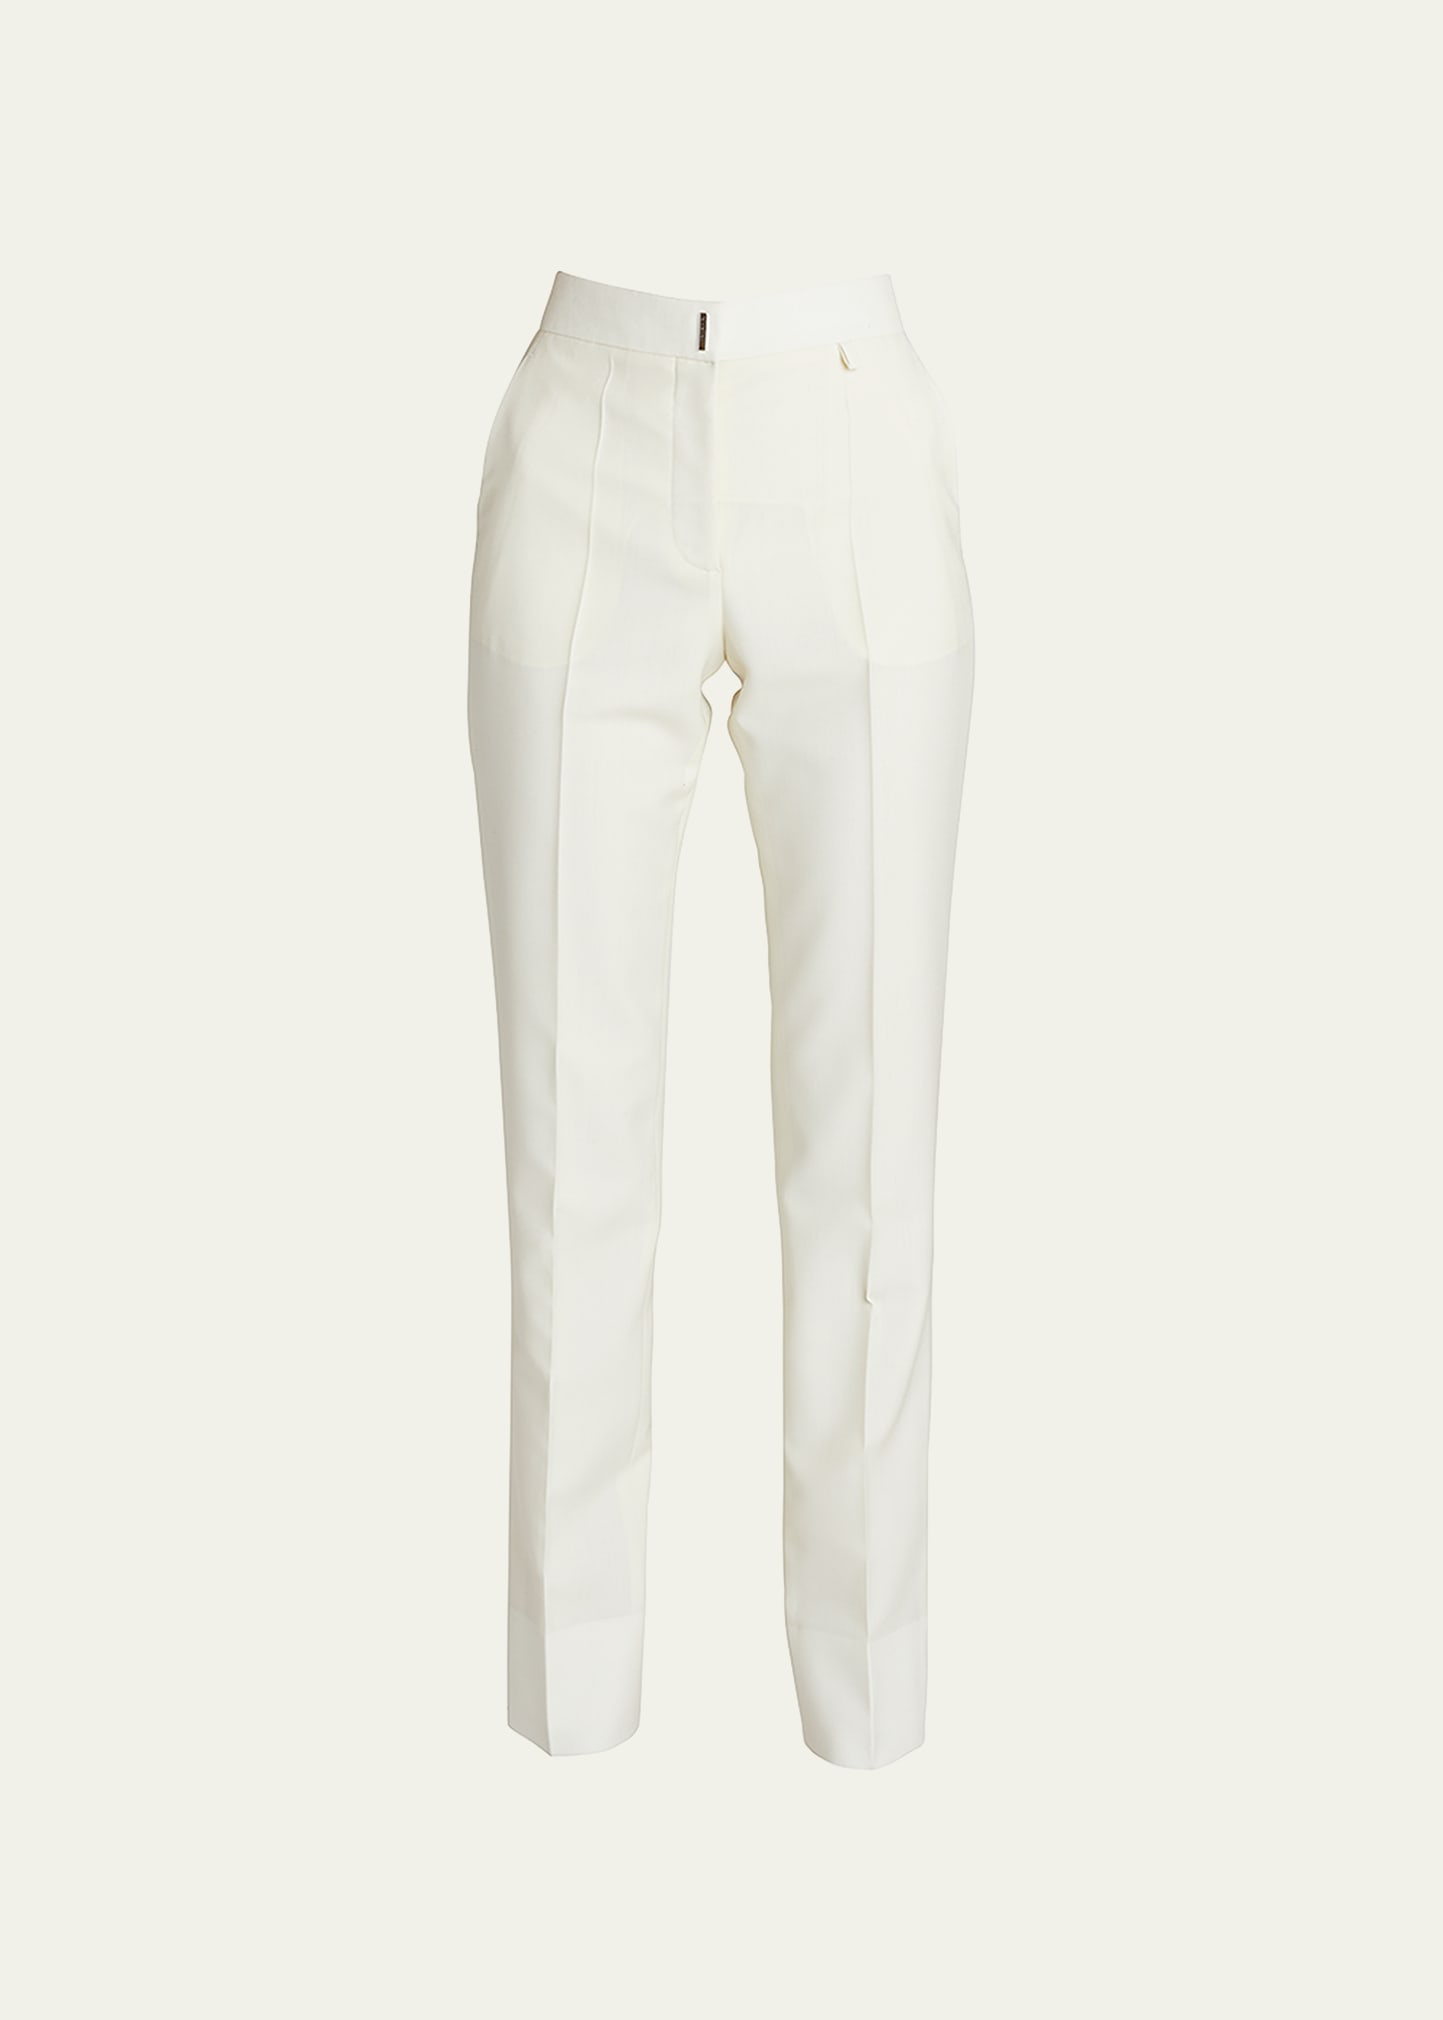 GIVENCHY Wool And Mohair Slim-Fit Pants